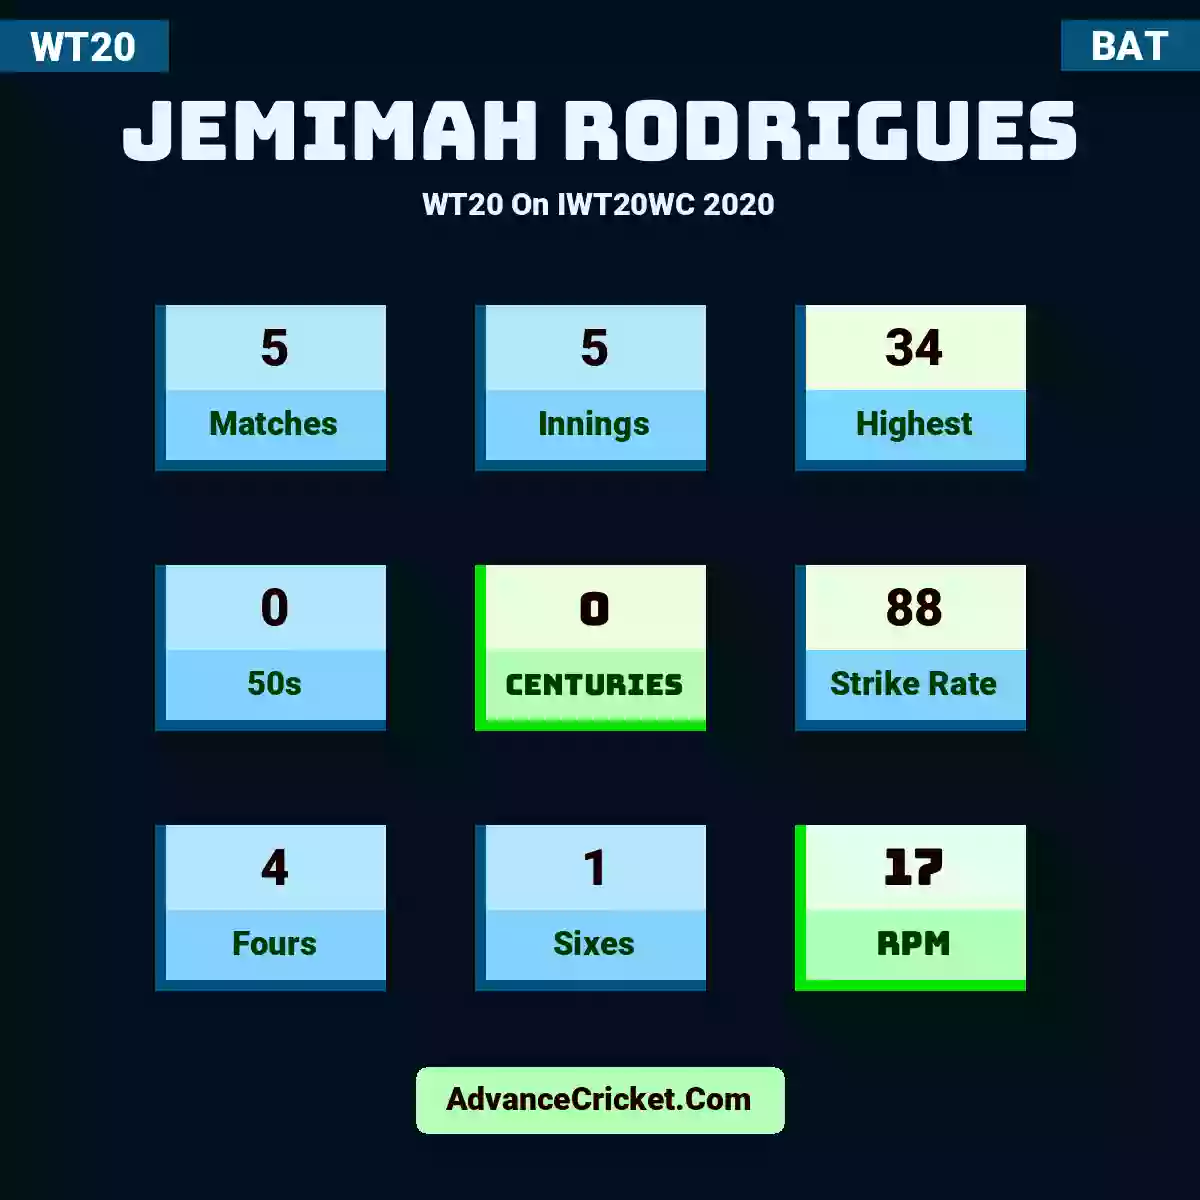 Jemimah Rodrigues WT20  On IWT20WC 2020, Jemimah Rodrigues played 5 matches, scored 34 runs as highest, 0 half-centuries, and 0 centuries, with a strike rate of 88. J.Rodrigues hit 4 fours and 1 sixes, with an RPM of 17.